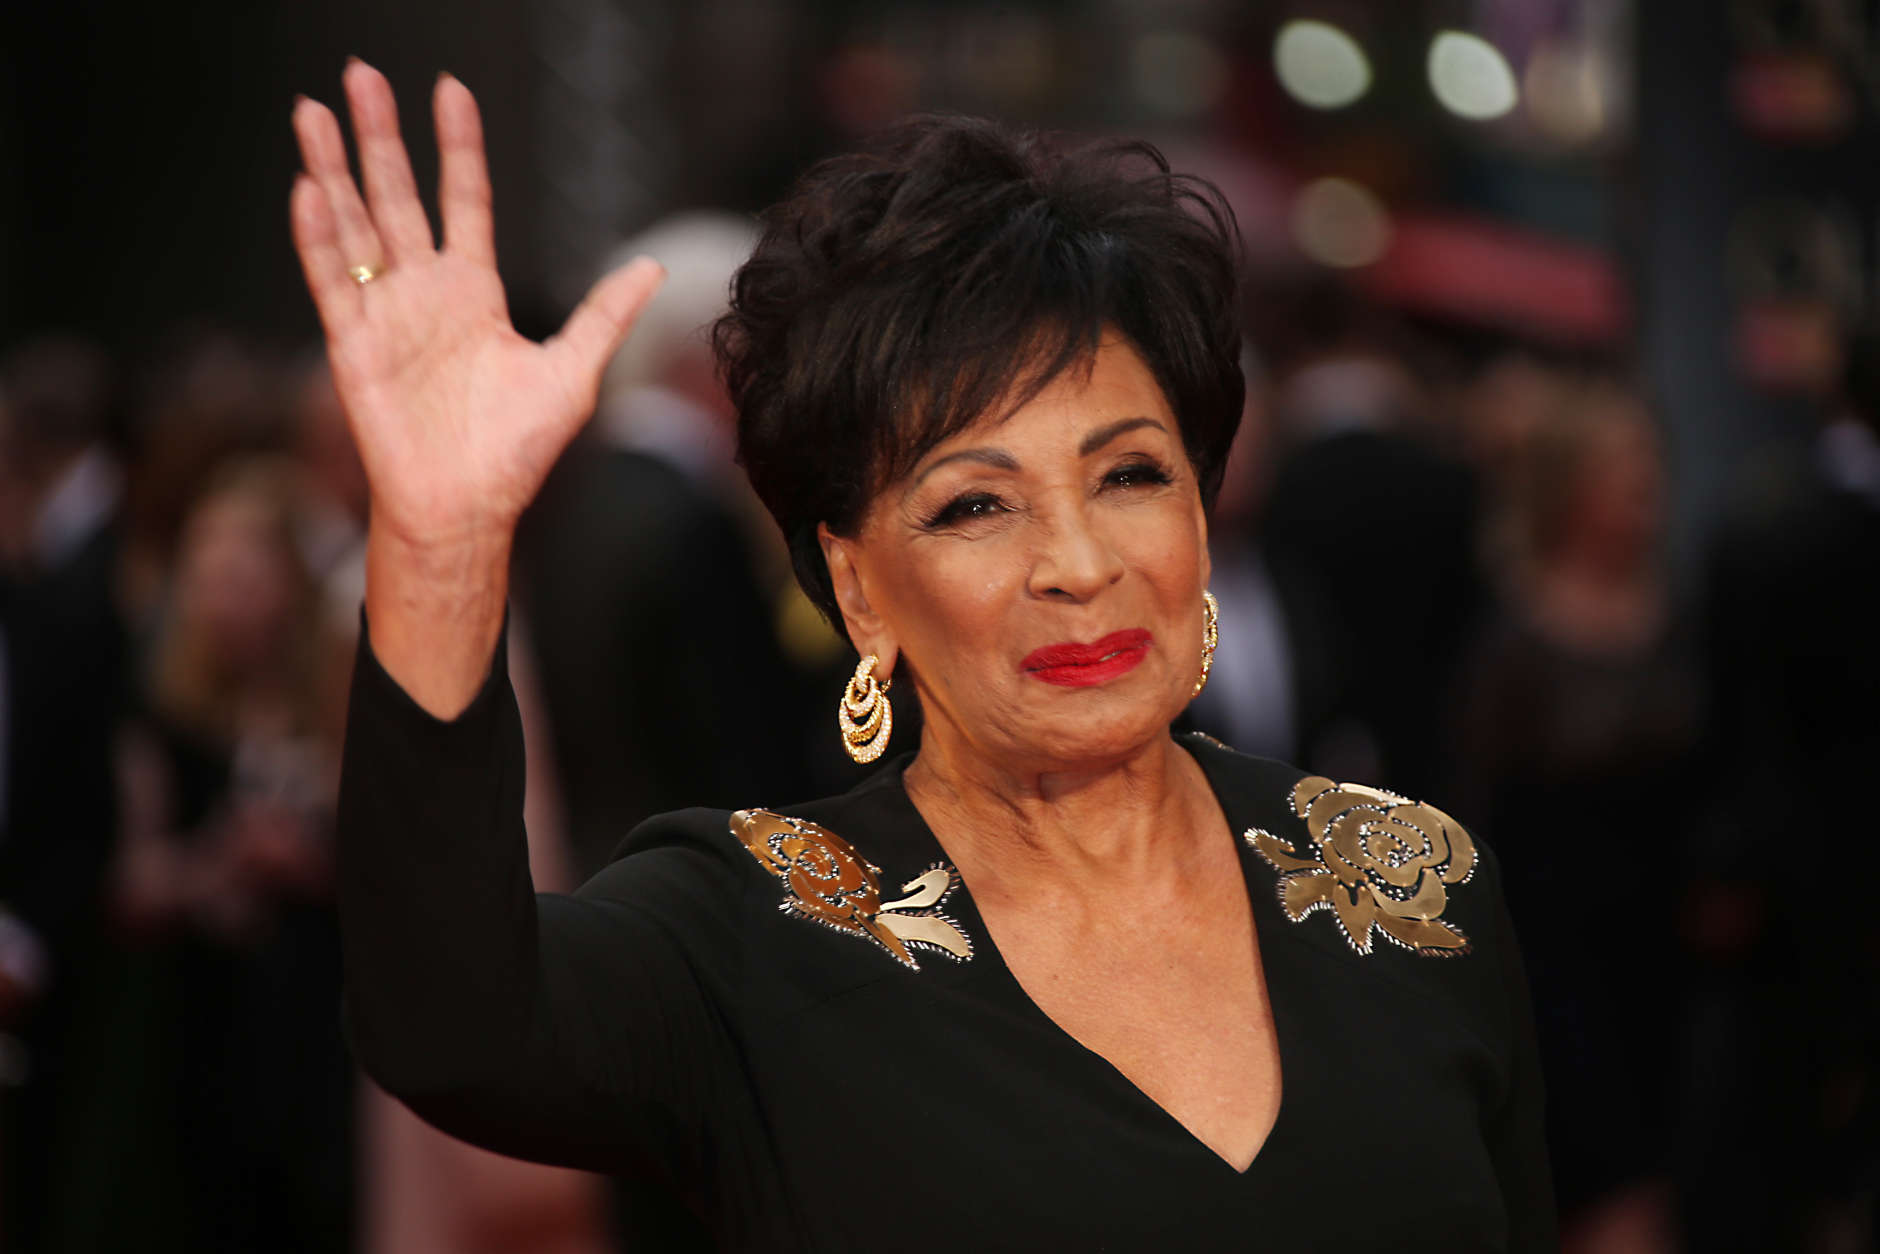 Dame Shirley Bassey poses for photographers upon arrival at the Olivier Awards in London, Sunday, April 3, 2016. (Photo by Joel Ryan/Invision/AP)